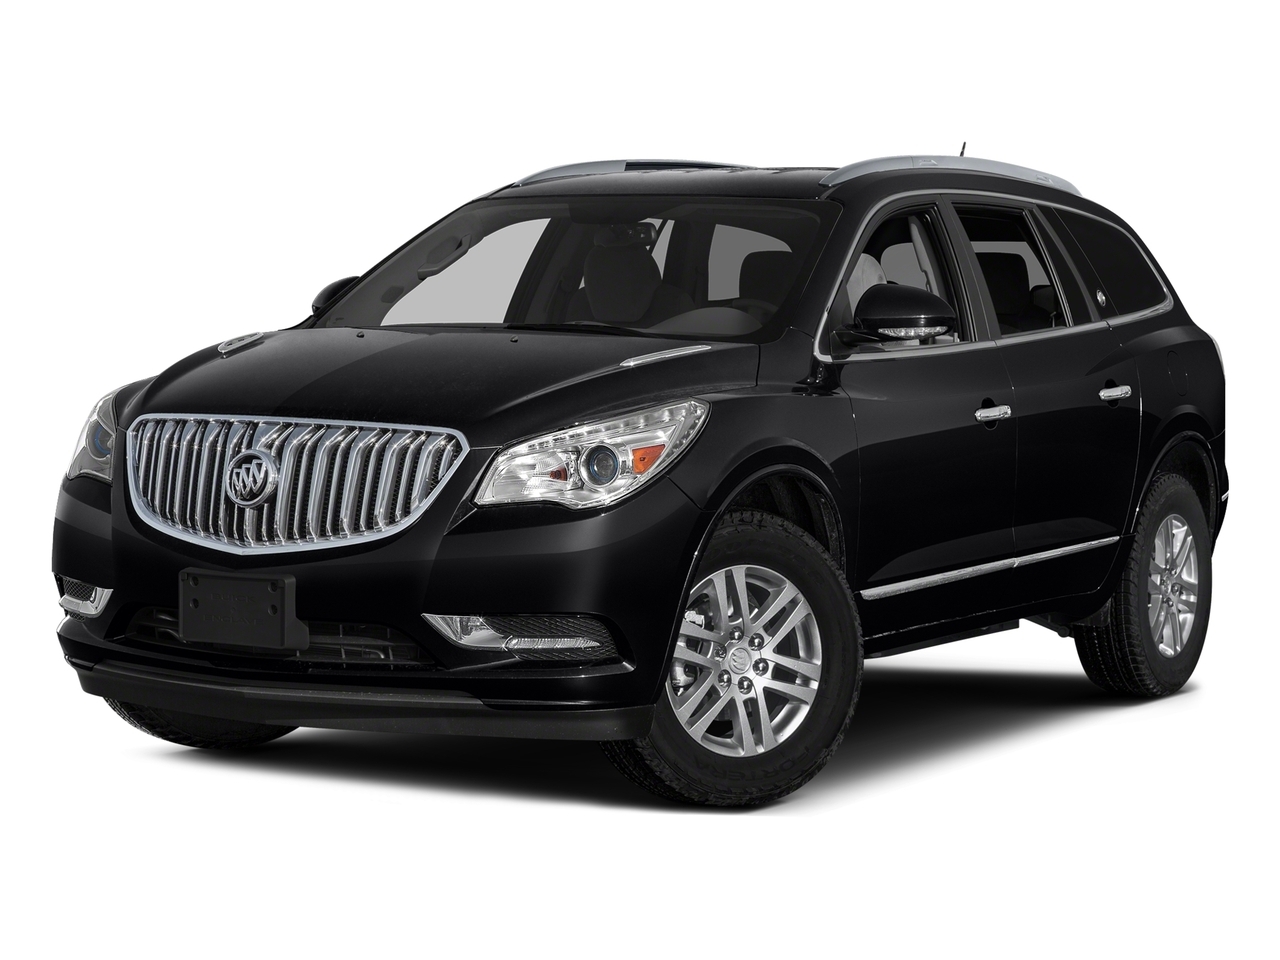 2017 Buick Enclave AWD PREMIUM | V6 | LOW KM's | LCL TRADE